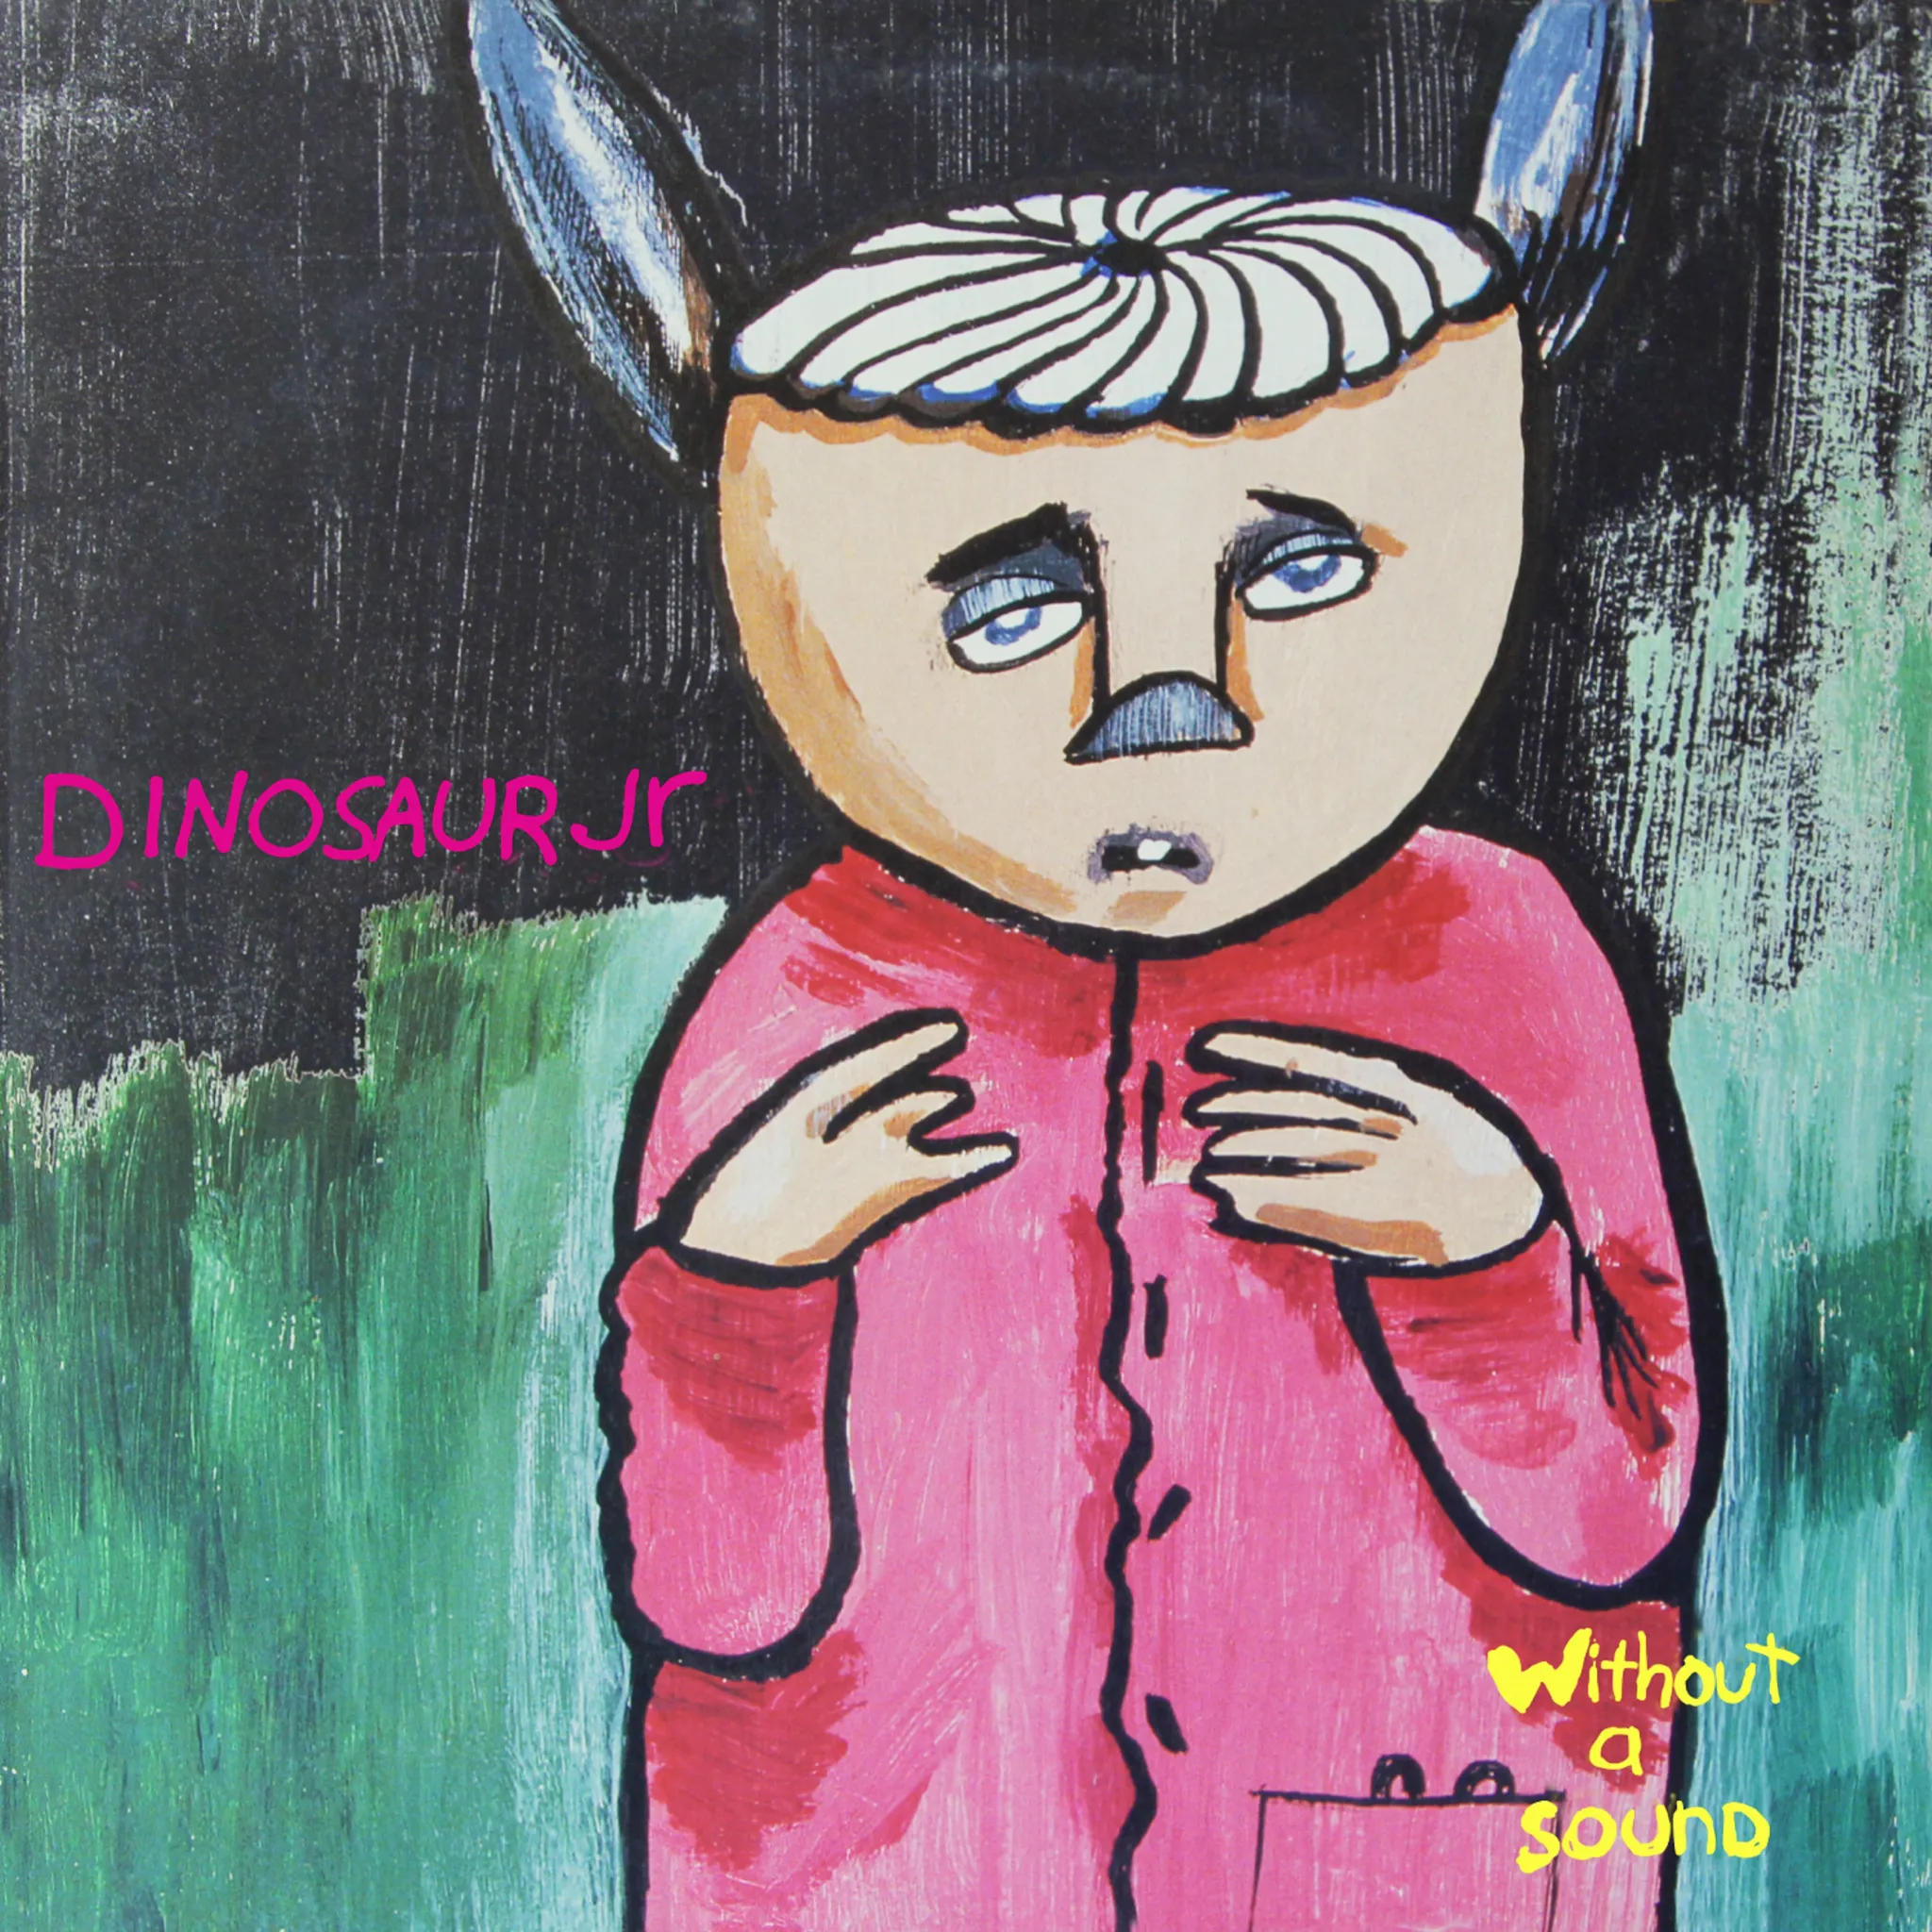 <strong>Dinosaur Jr - Without a Sound (Expanded)</strong> (Vinyl LP - yellow)